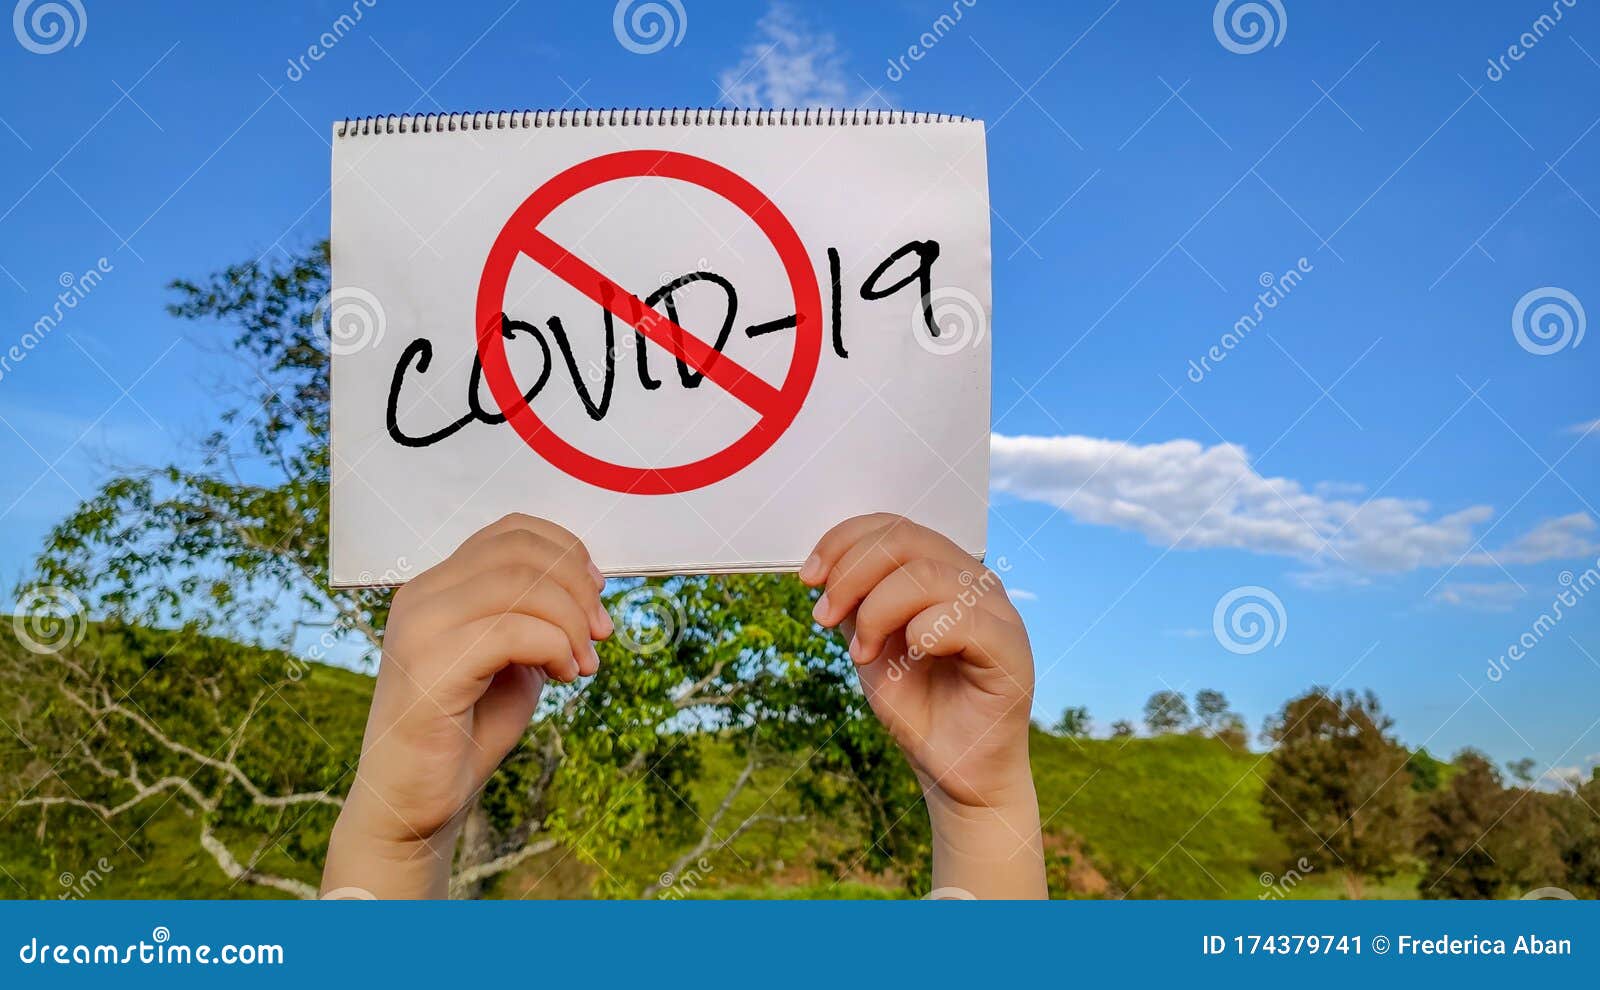 text covid-19 with stop sign on notepad